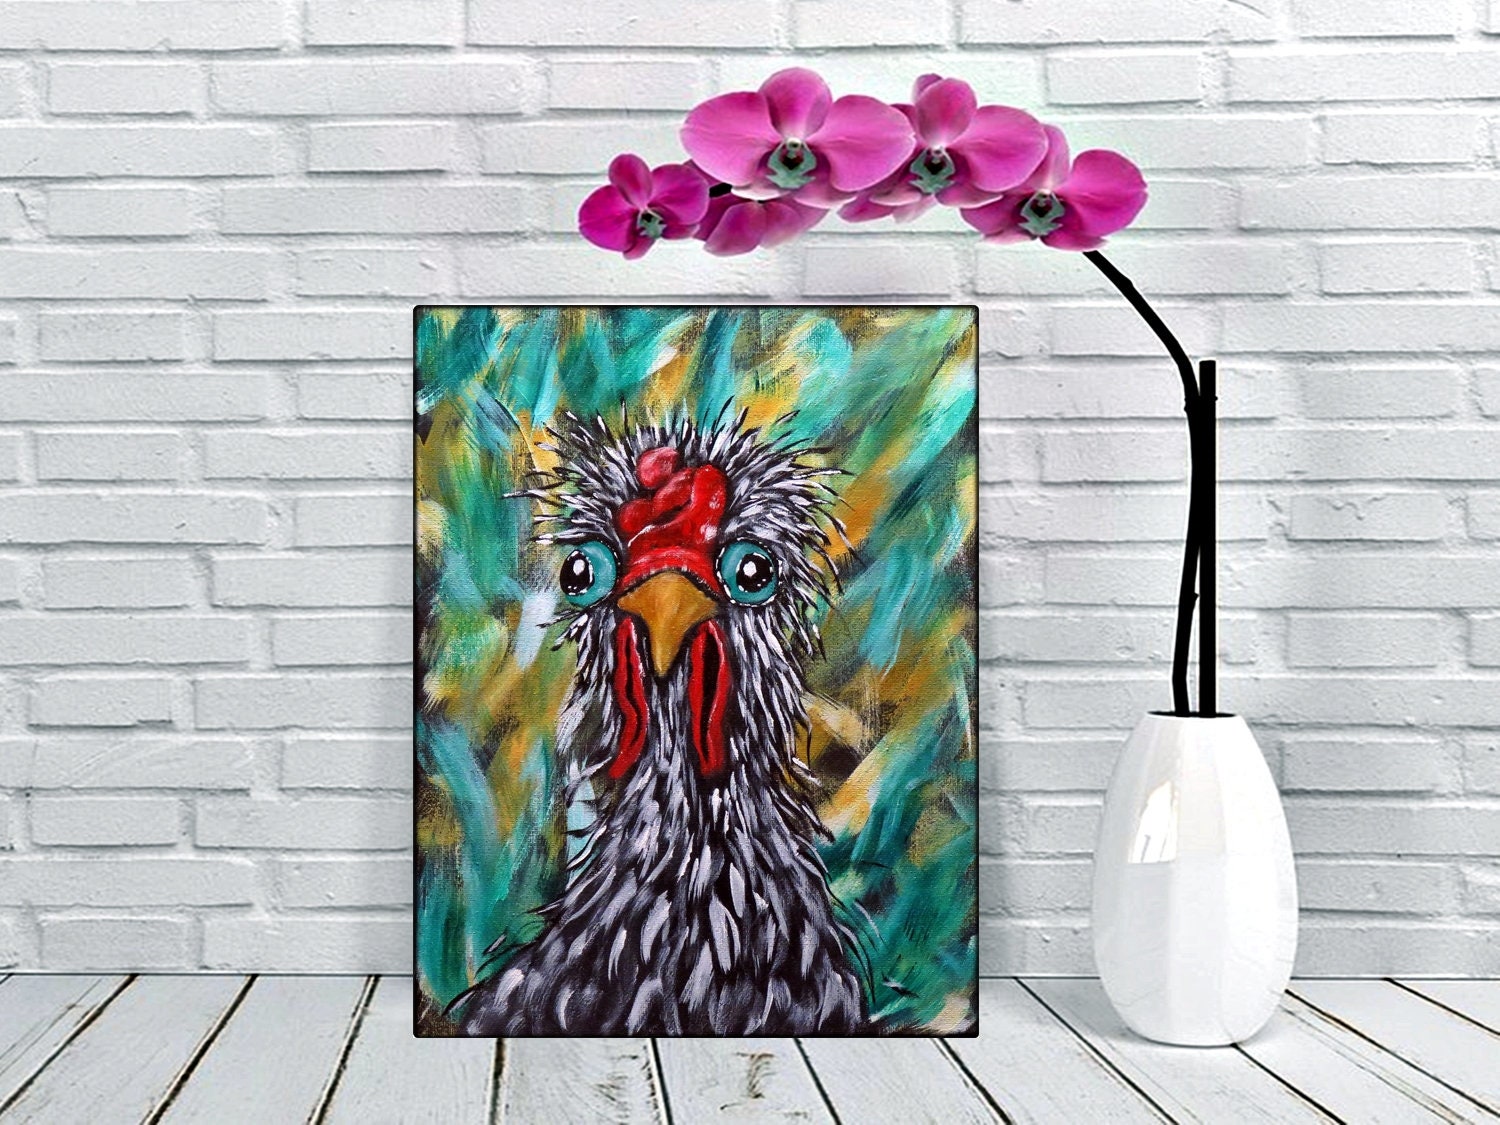 Chicken Wall Art Original Acrylic Painting on Canvas Whimsical Country